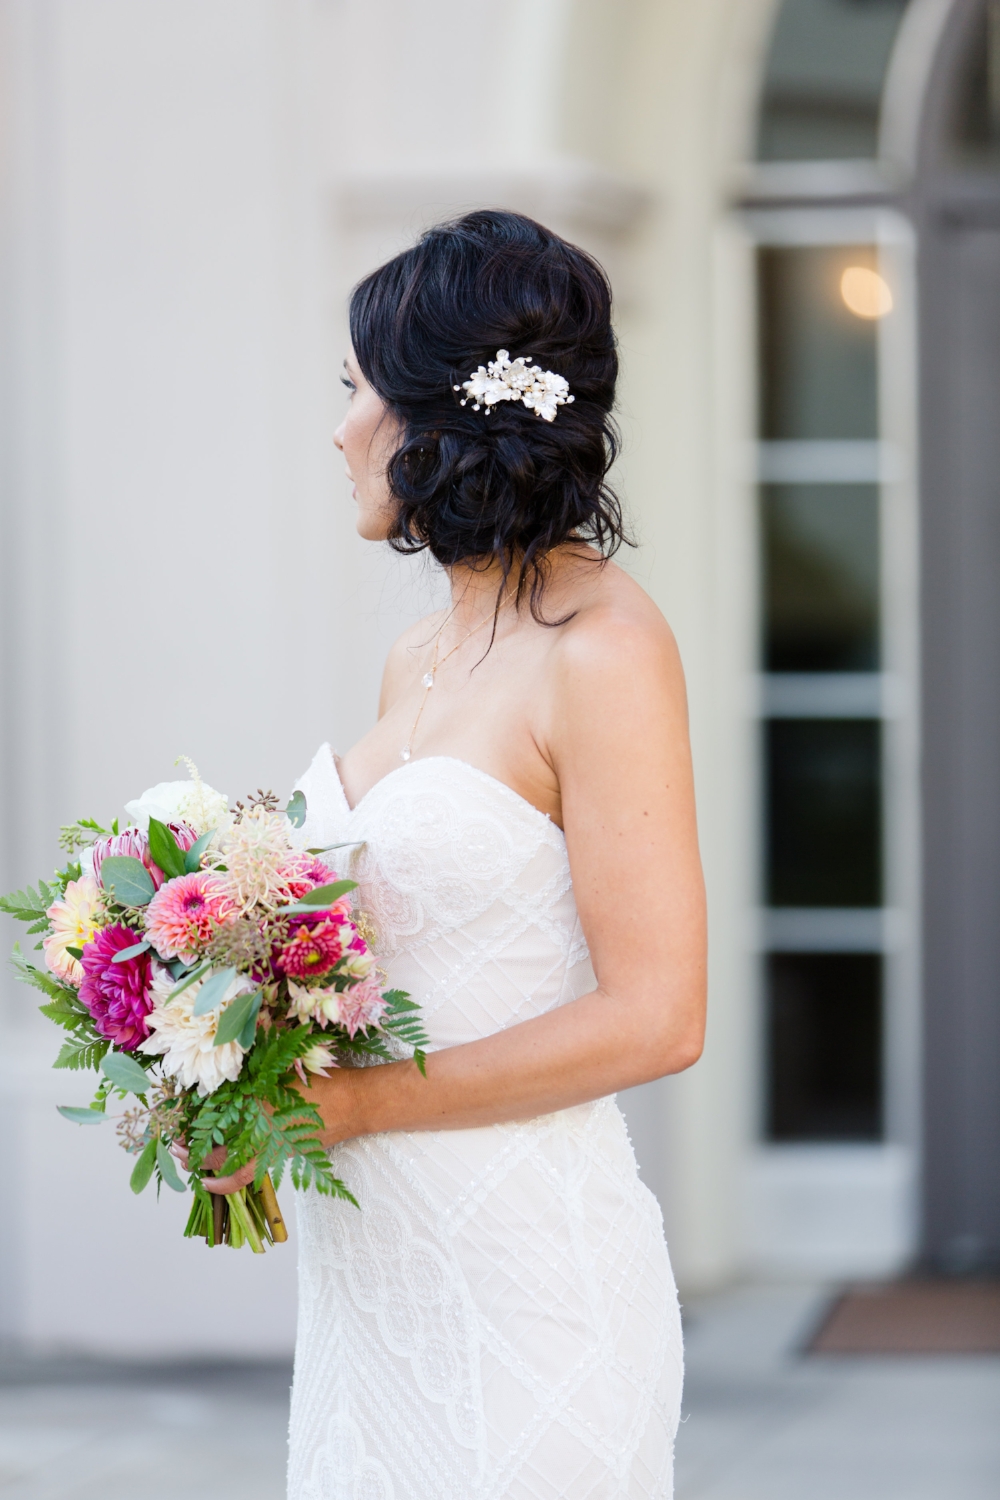  Brunette Bride with Updo and hair accessory holding bouquet outside in Wedding Photography. Bridal Hairstyles and Makeup by Vanity Belle in Orange County (Costa Mesa) and San Diego (La Jolla) 